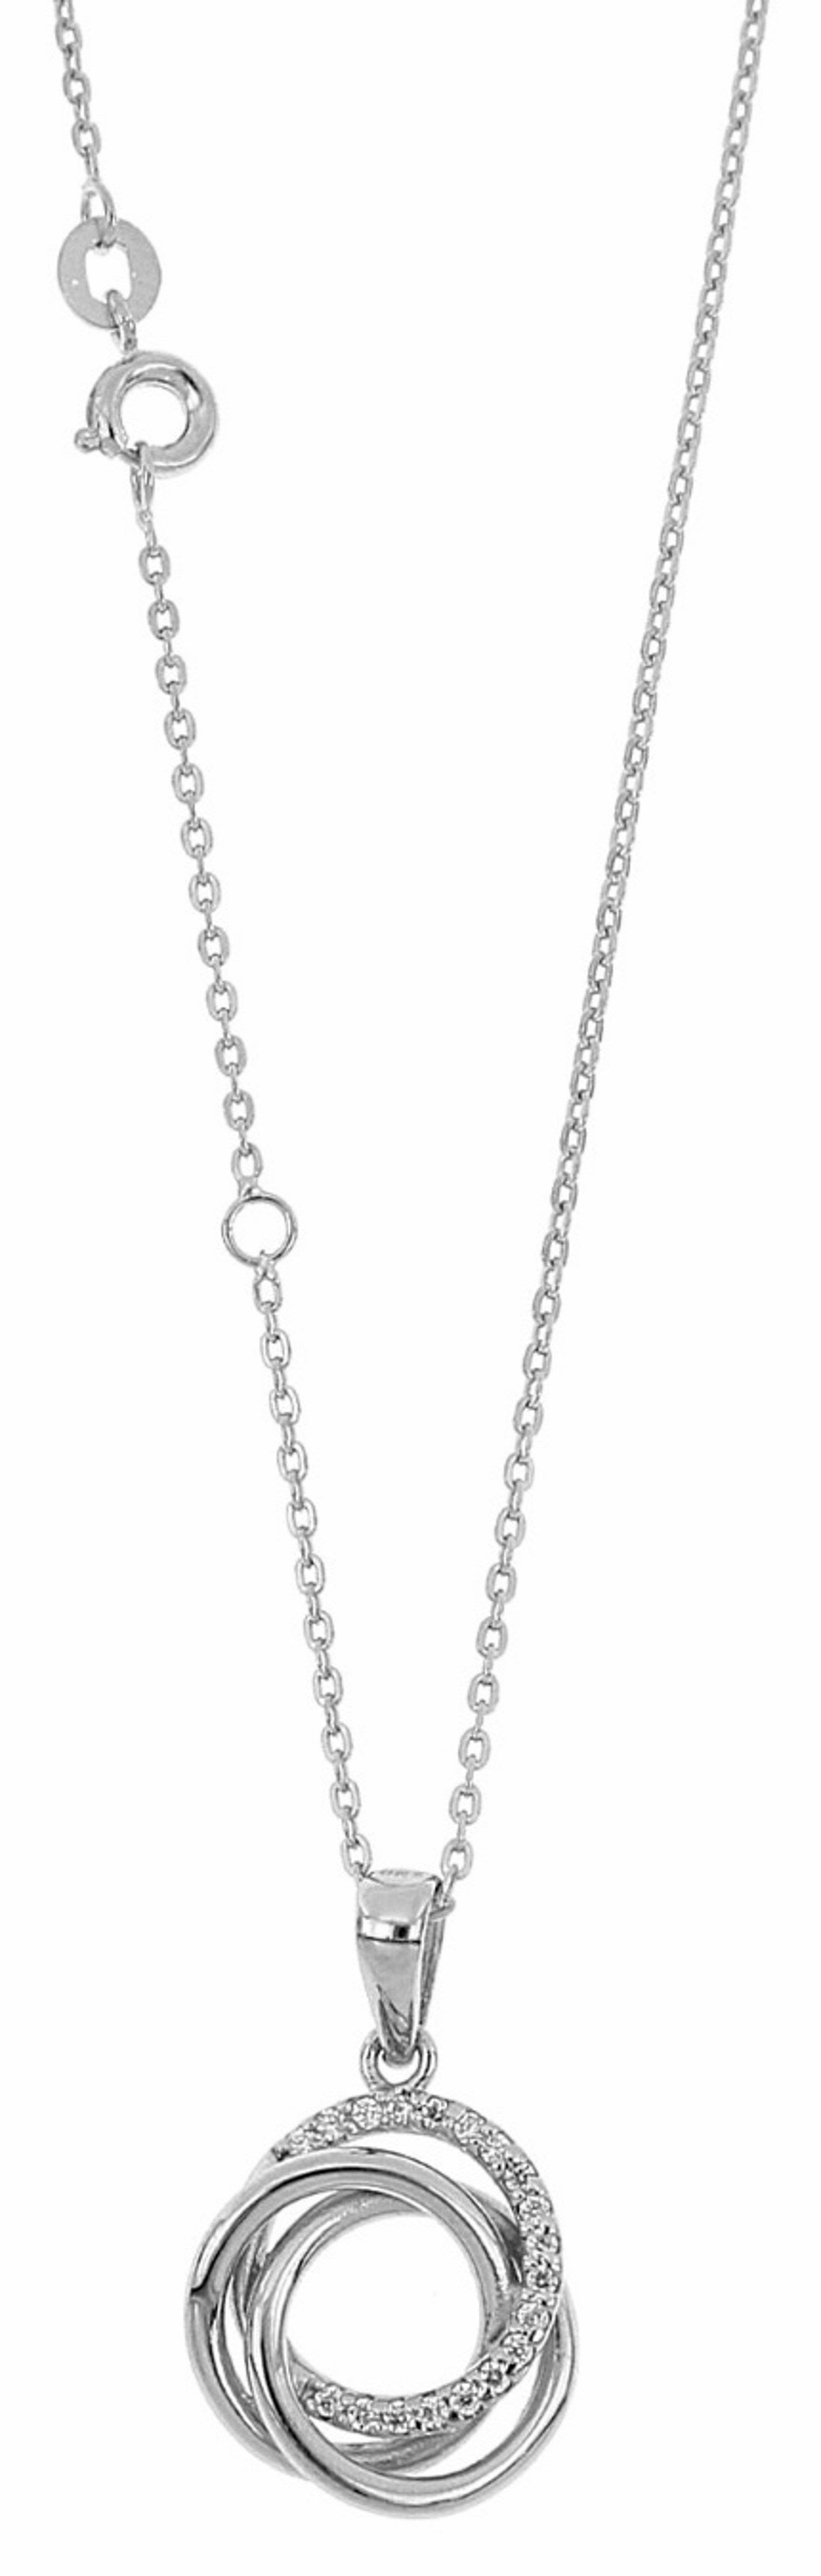 Sterling Silver Open Circle Pendant W/ Chain